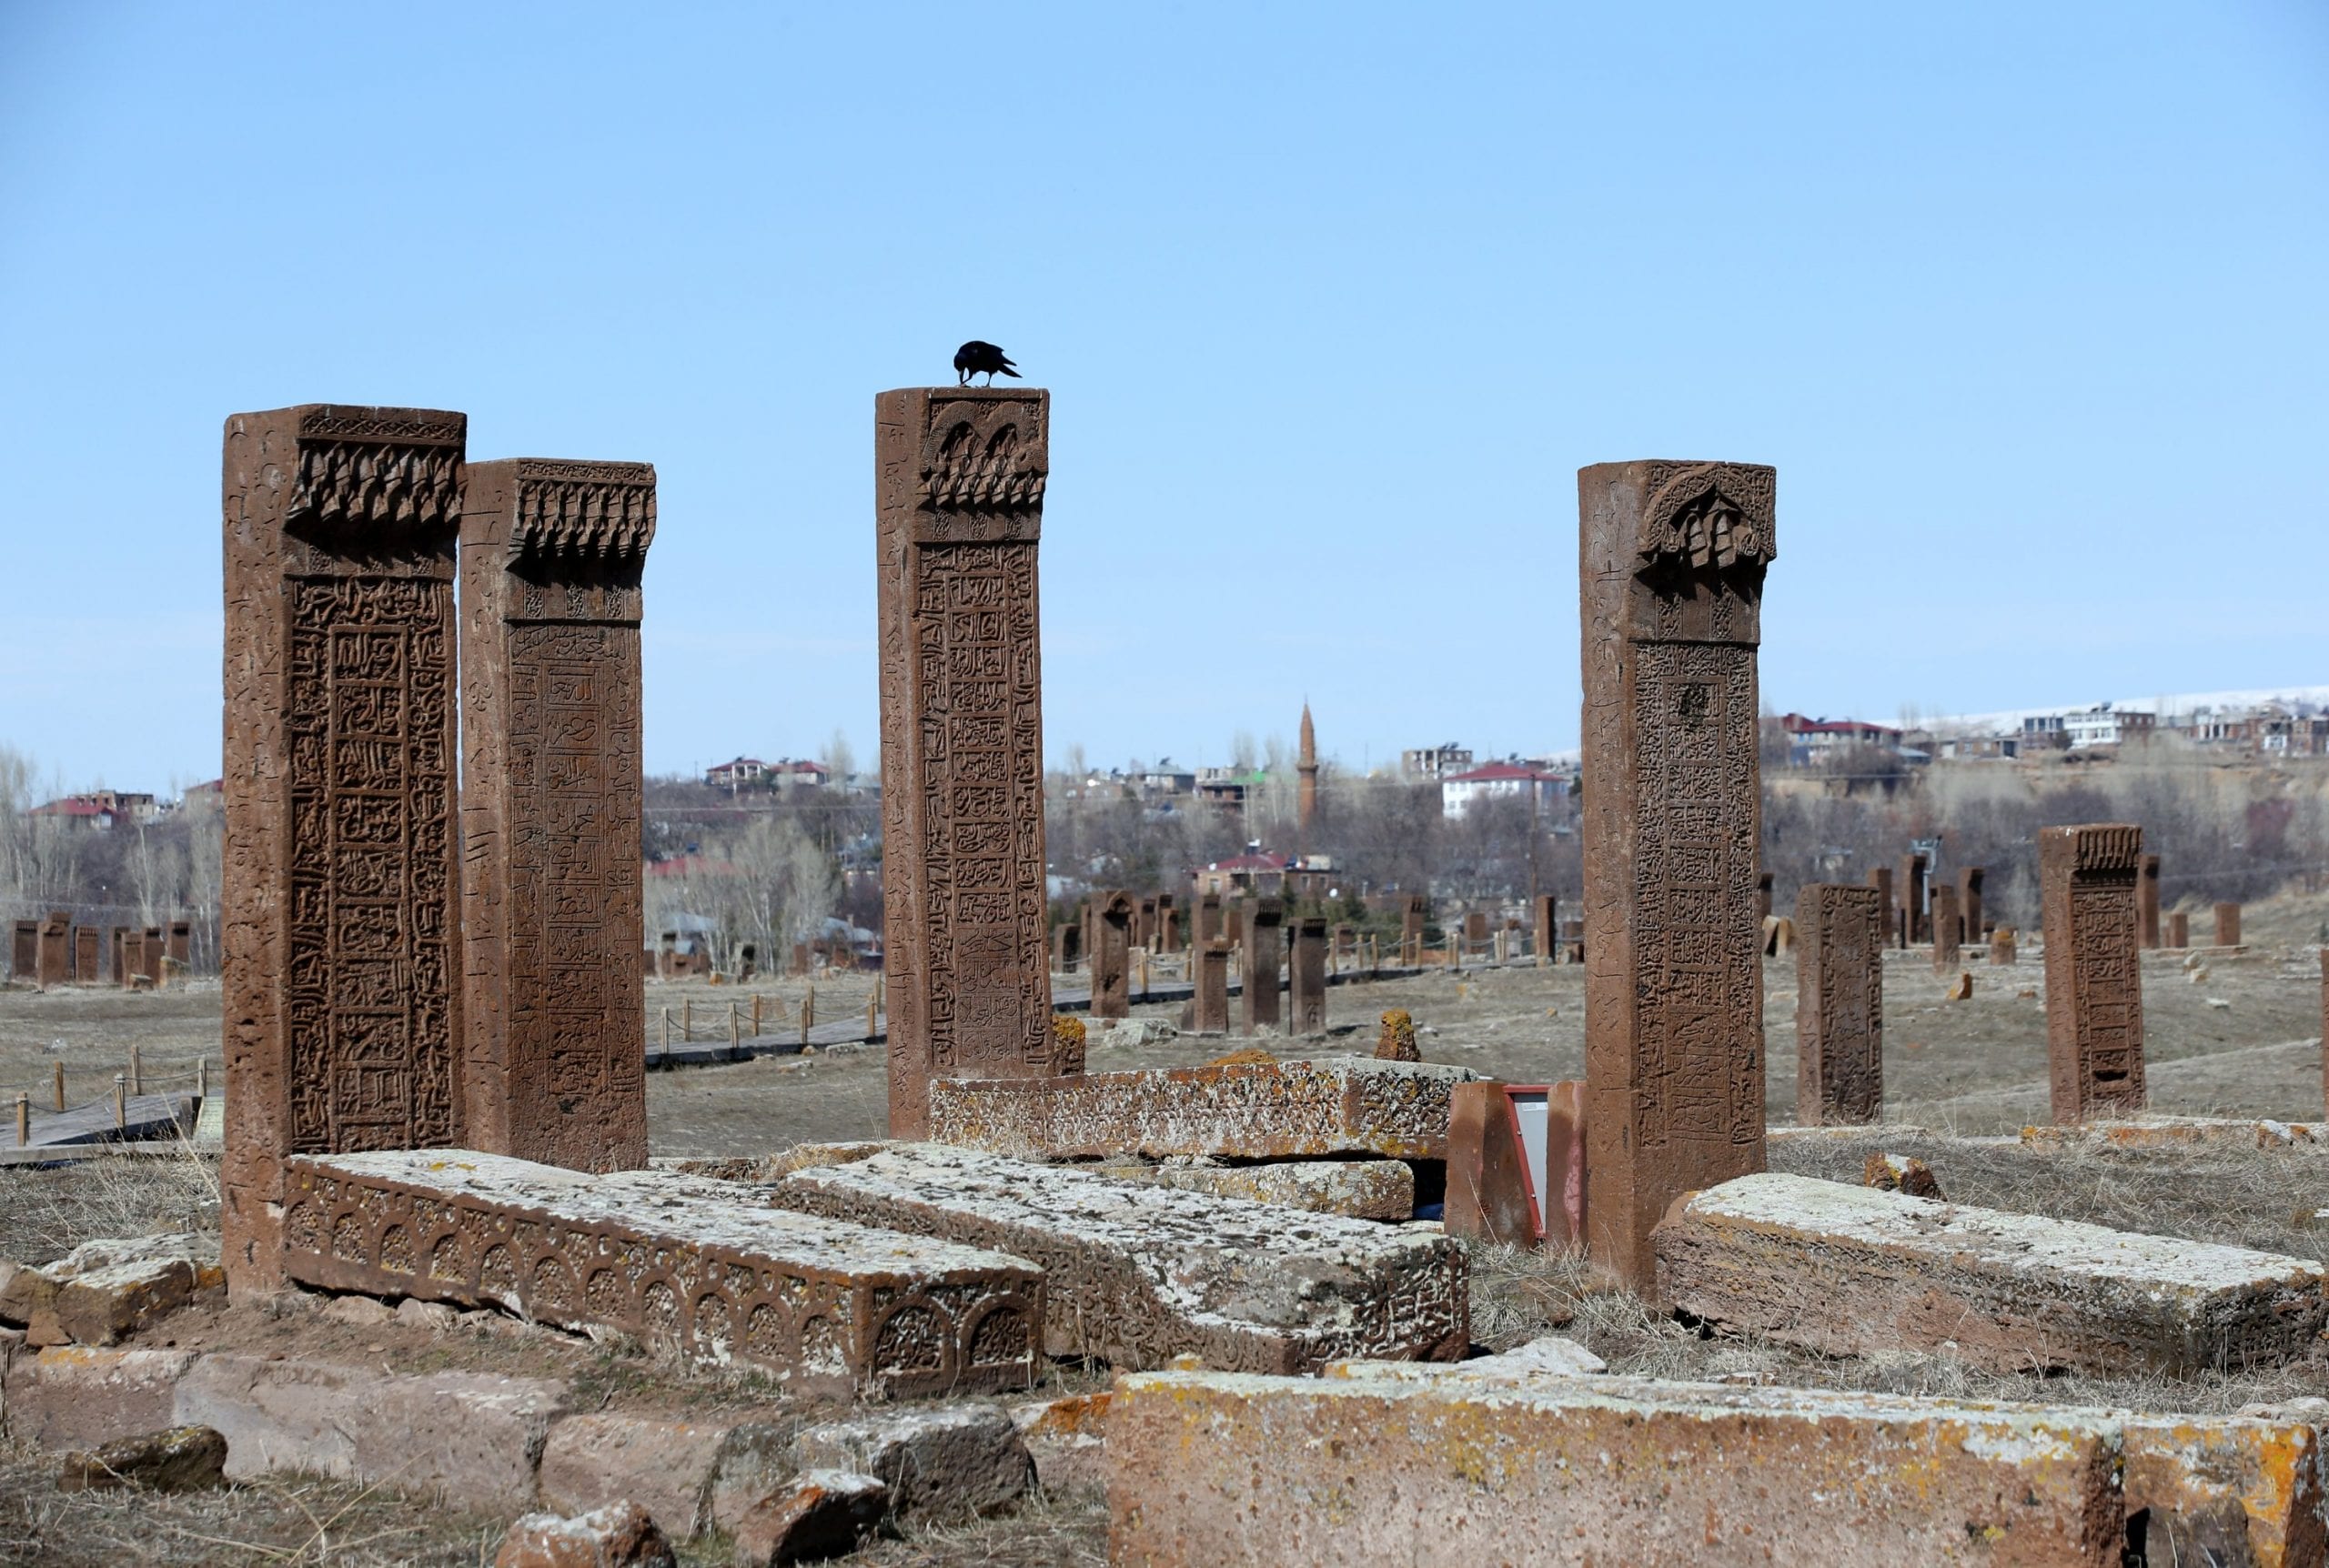 Seljuk cemetery in Turkey to be introduced to the world